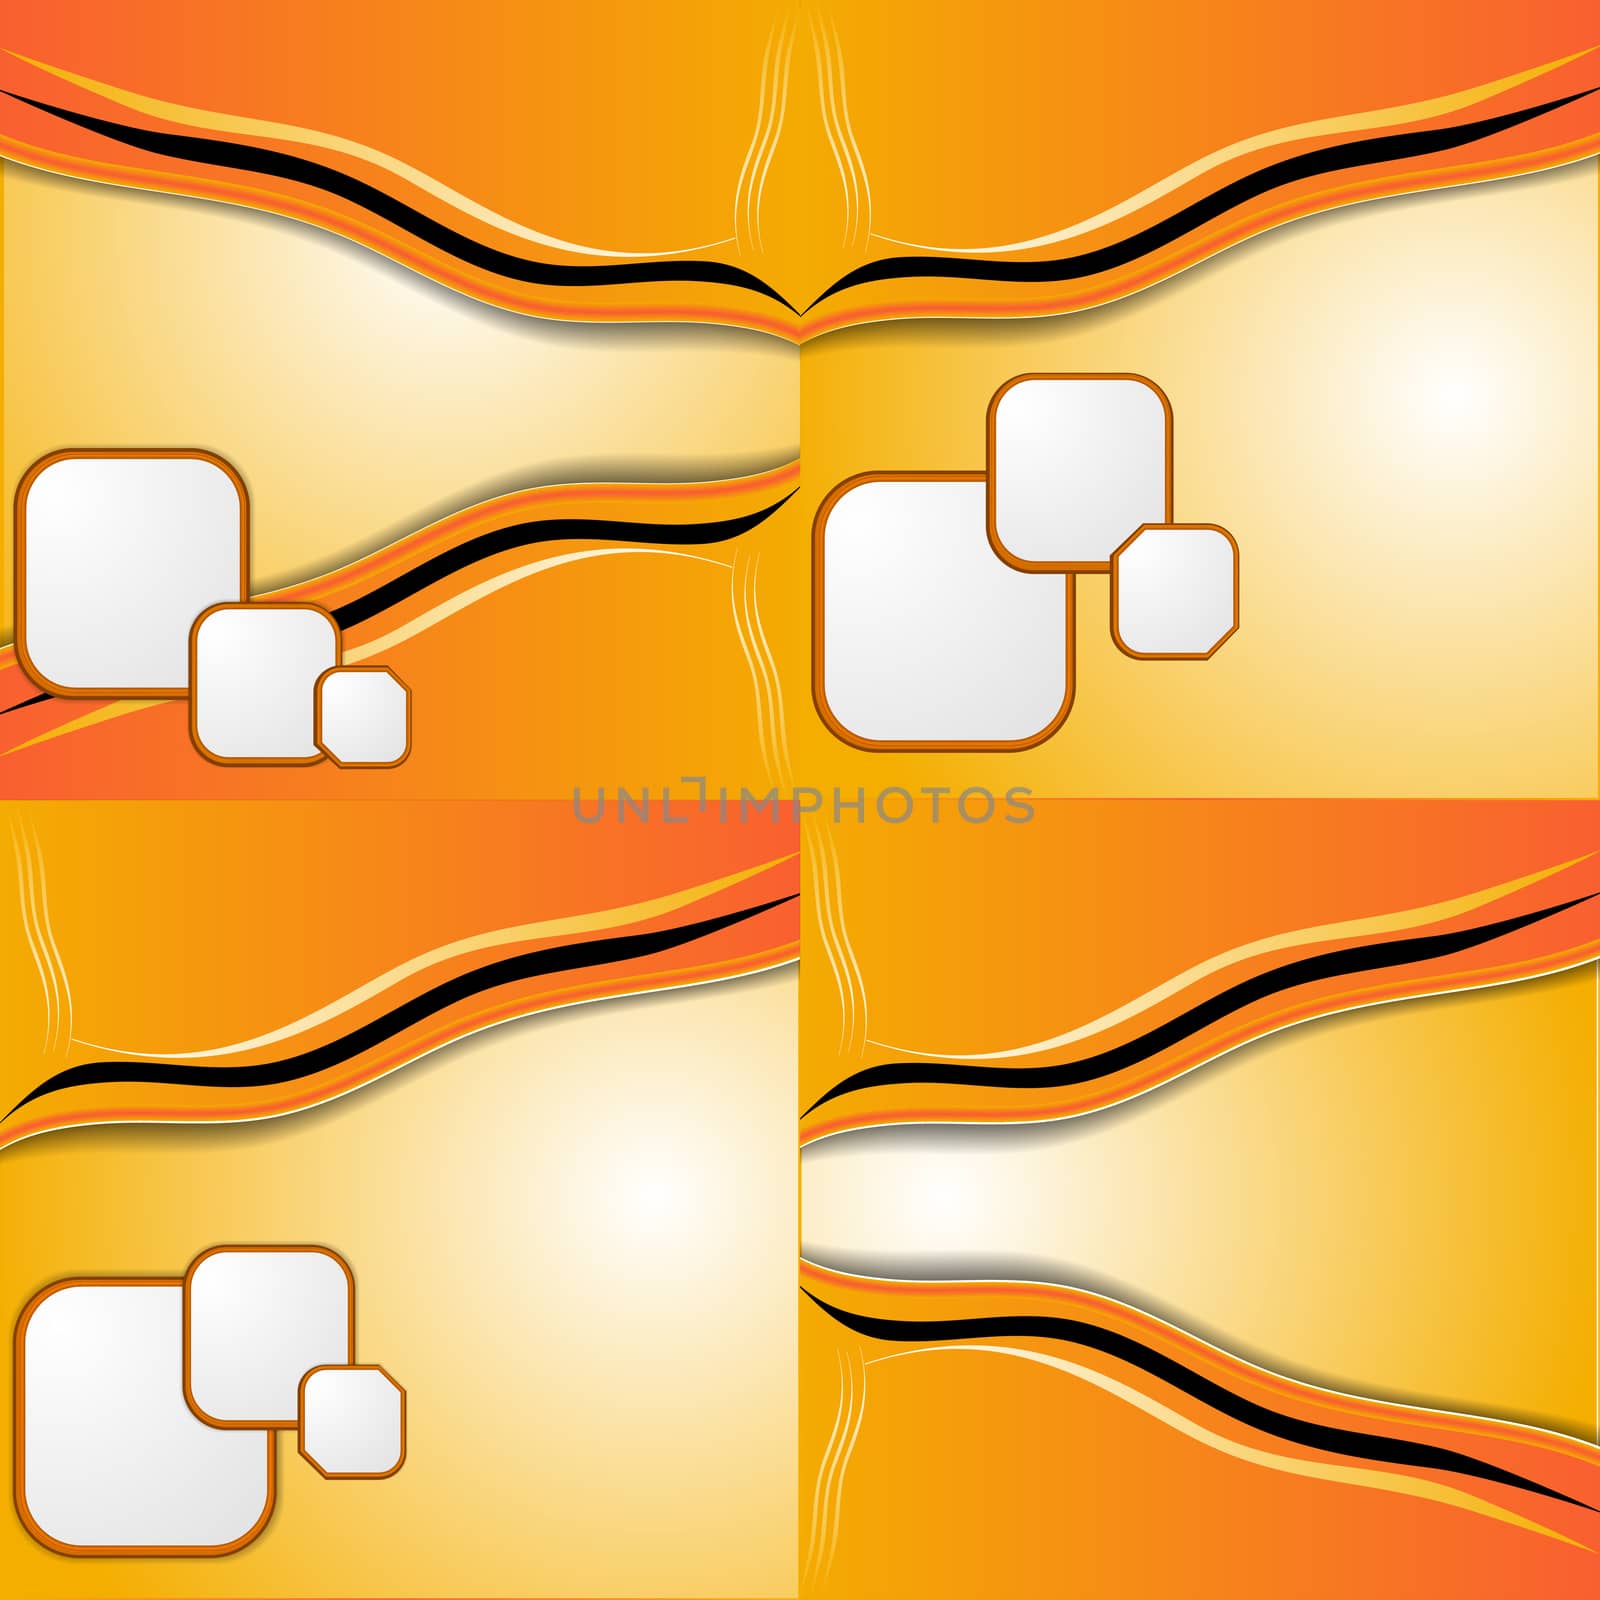 Set of 4 orange backgrounds with place for your text. Raster copy.